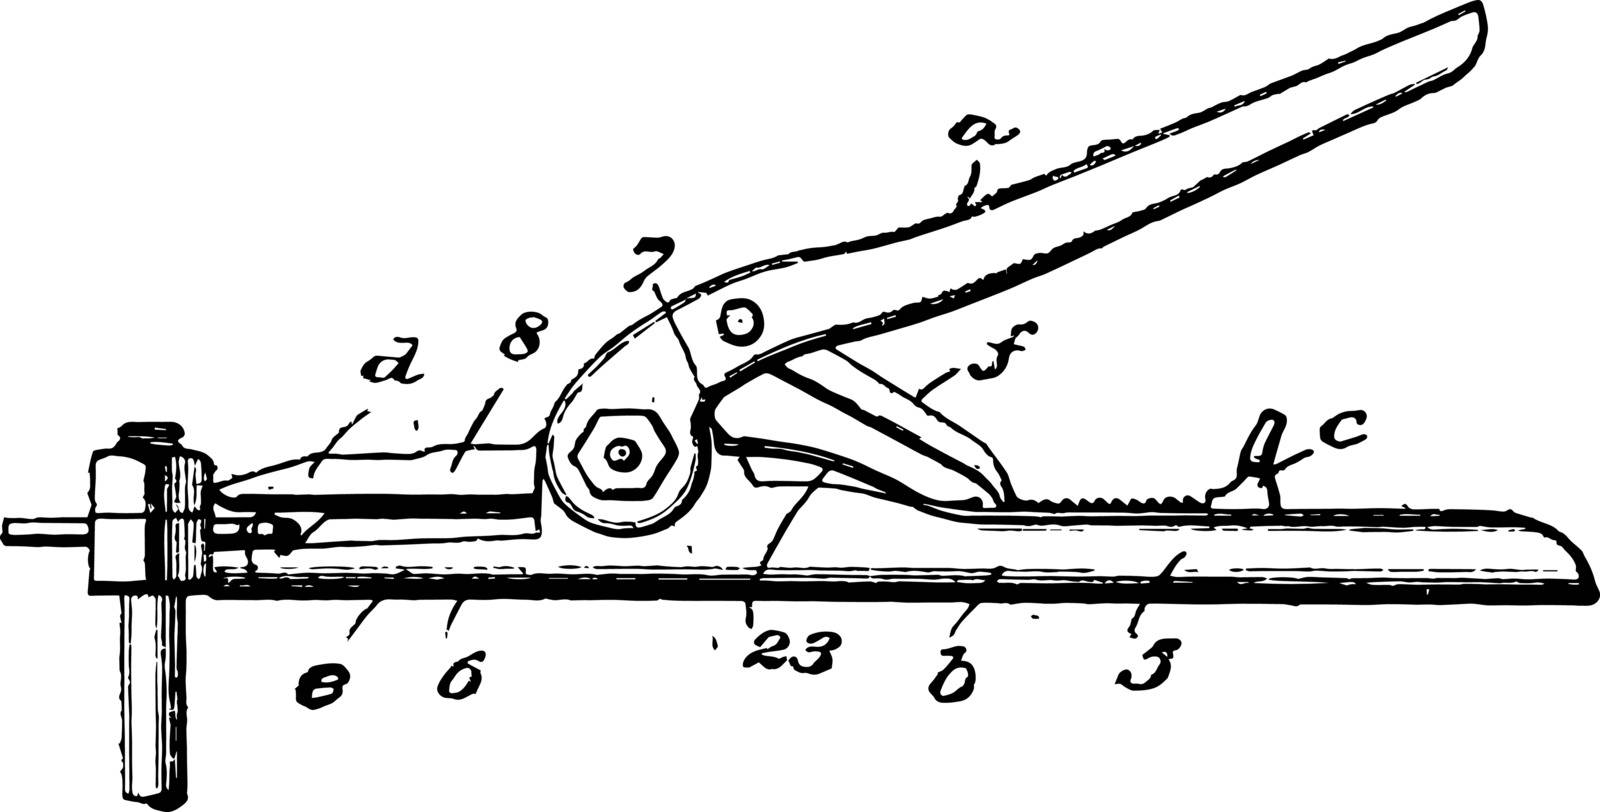 This illustration represents Pin Removal Tool which a tool having a wedge shaped head vintage line drawing or engraving illustration.